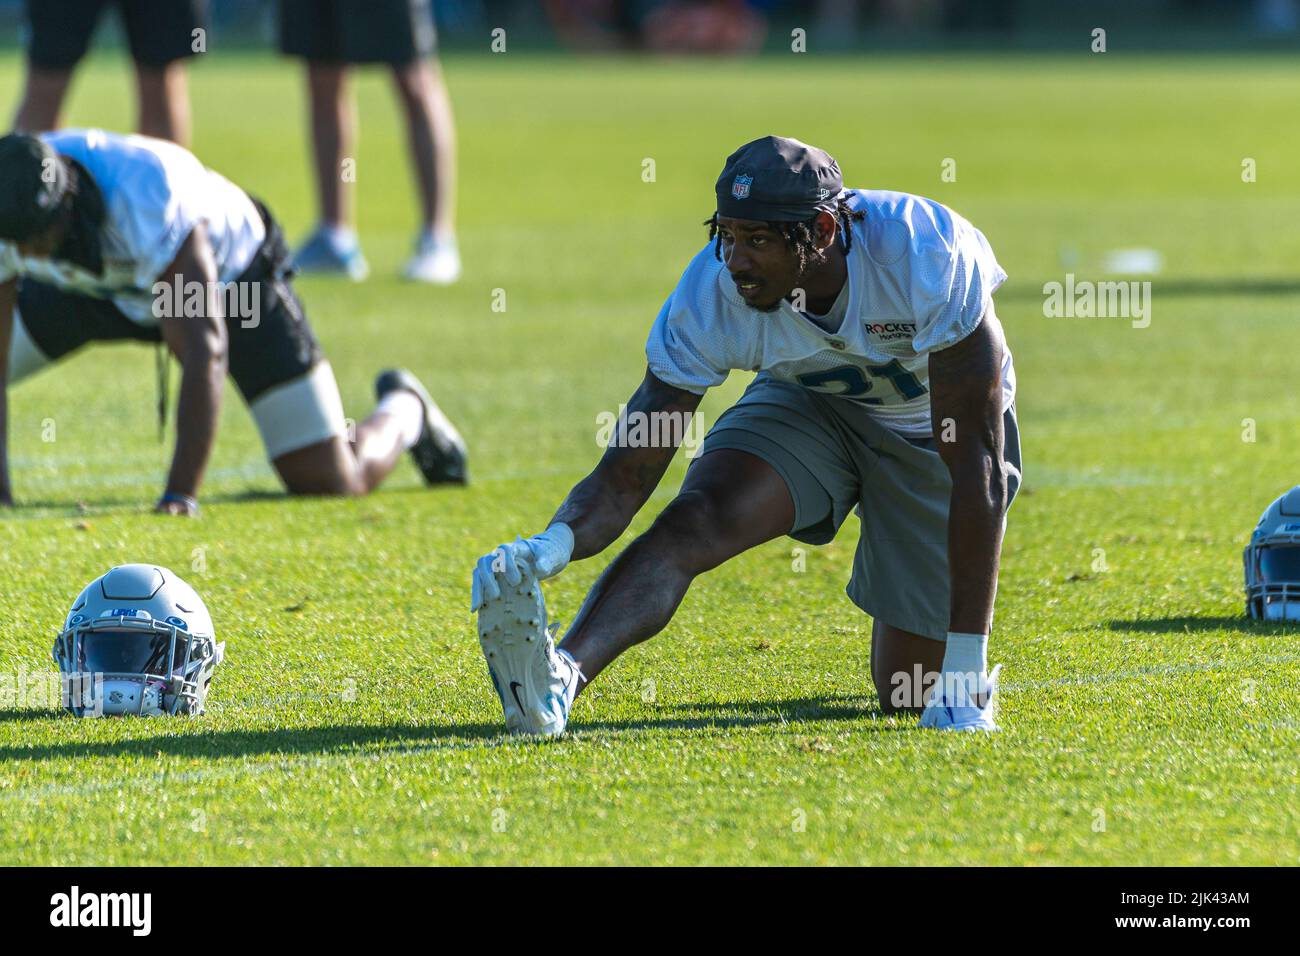 ALLEN PARK, MI - JULY 30: Detroit Lions S Tracy Walker (21) stretches before individual drills start during Lions training camp on July 30, 2022 at Detroit Lions Training Camp in Allen Park, MI (Photo by Allan Dranberg/CSM) Stock Photo